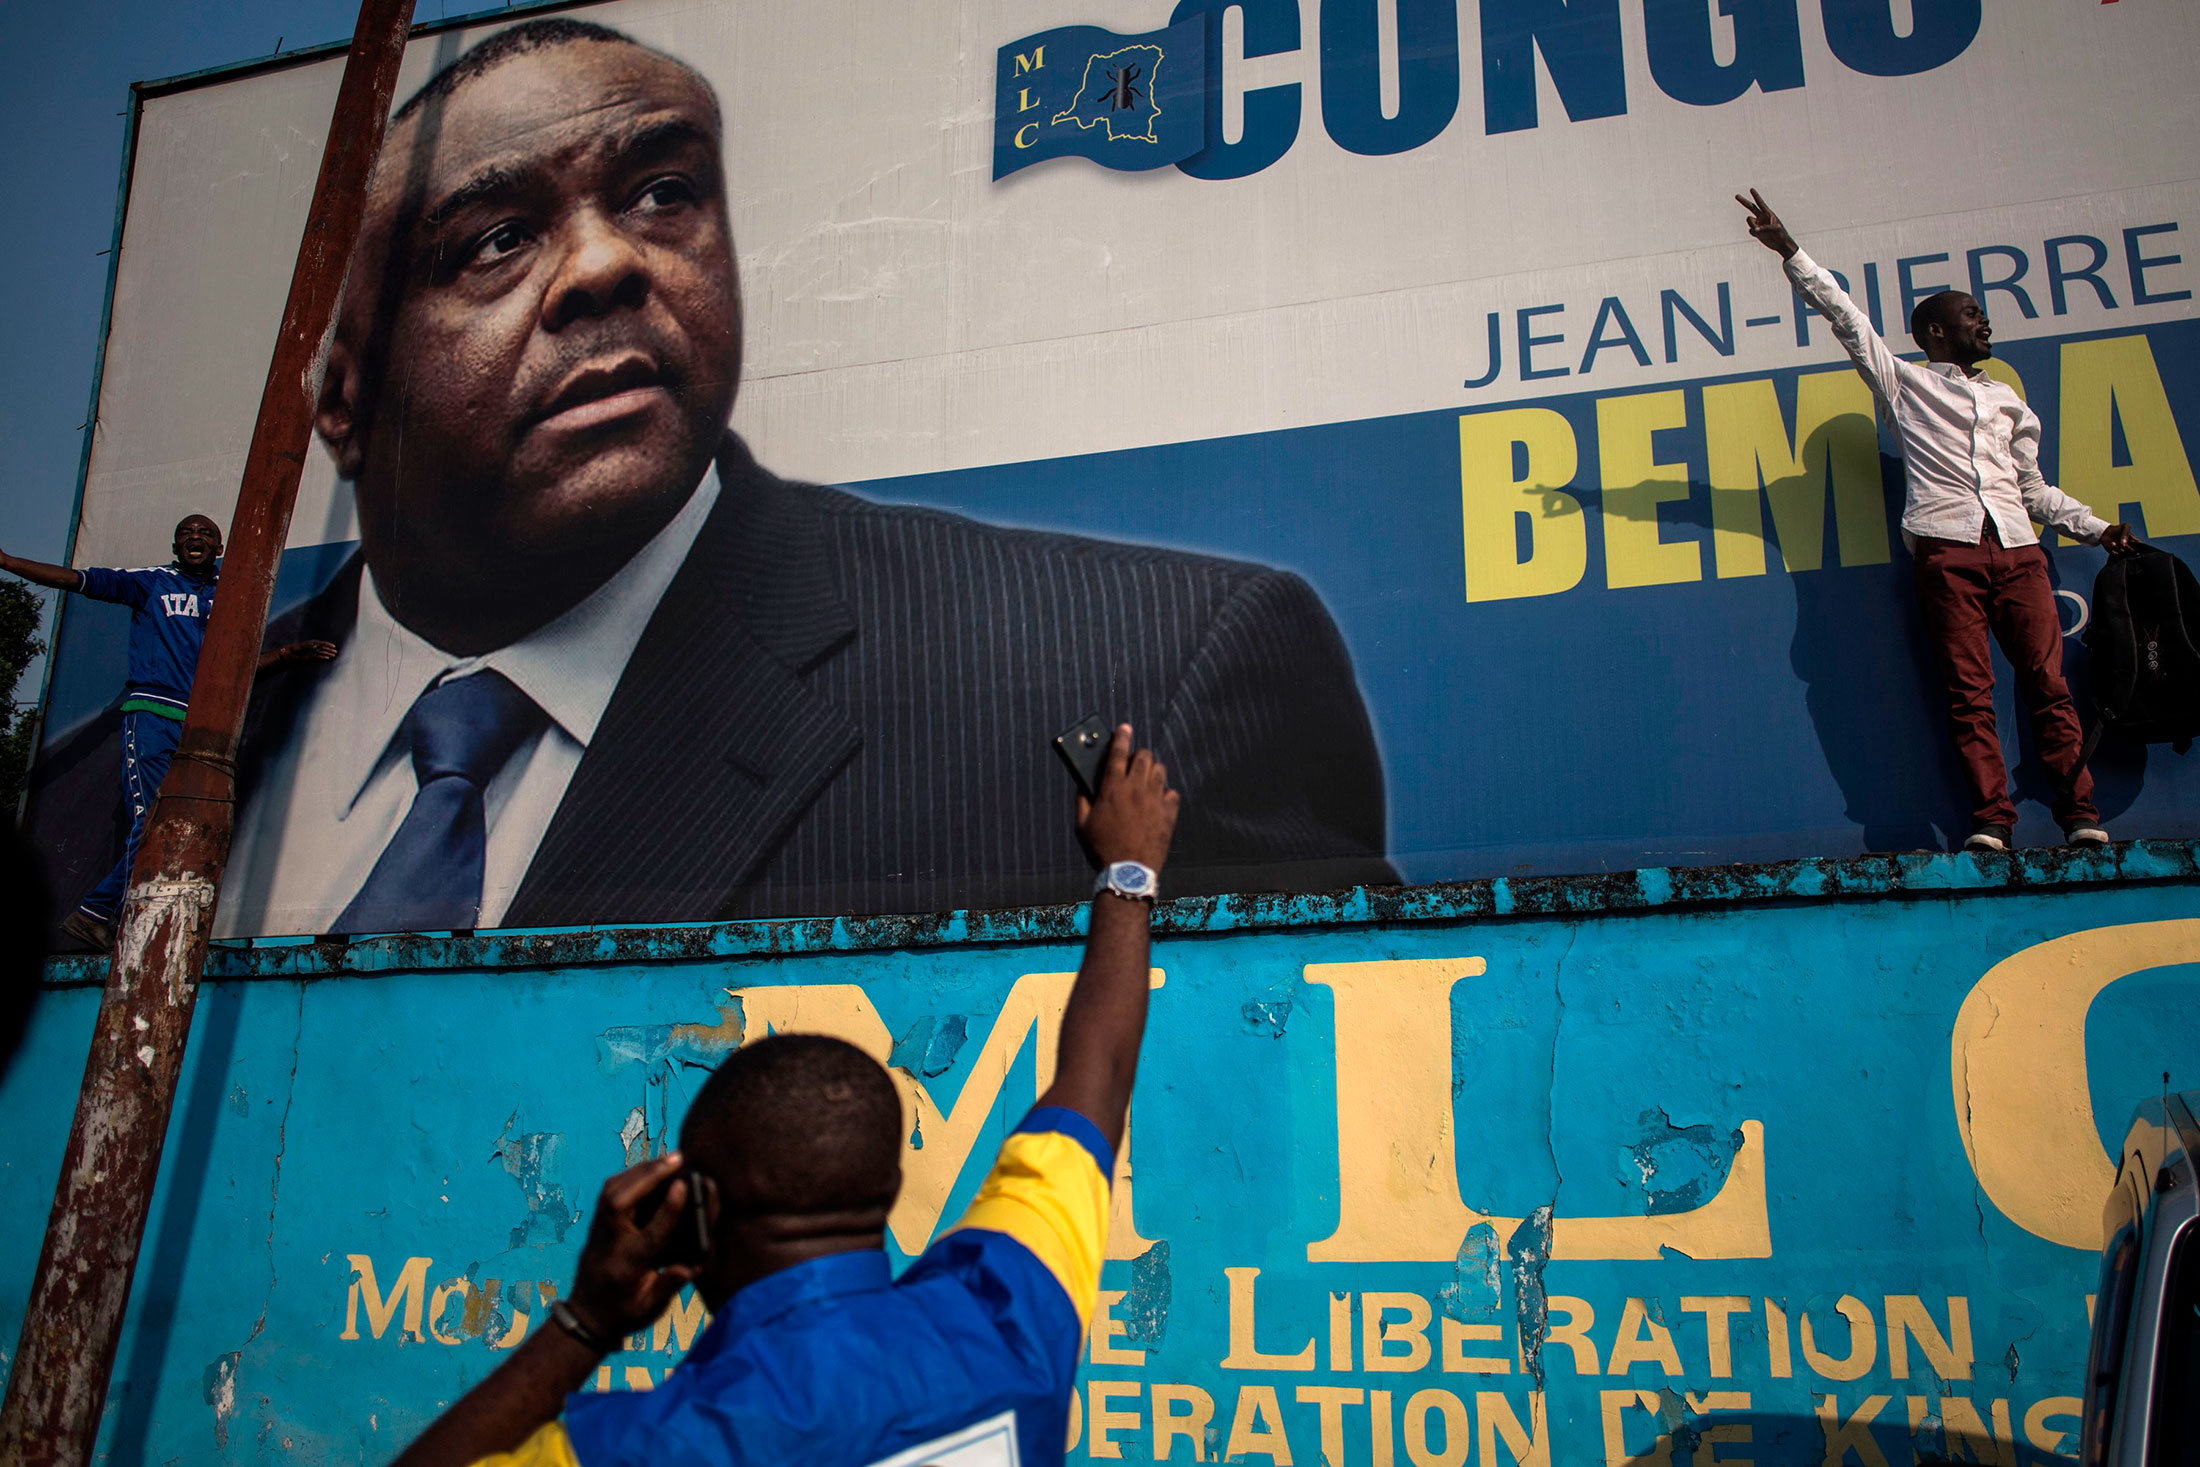 Supporters of Jean-Pierre Bemba in front of his picture in Kinshasa.